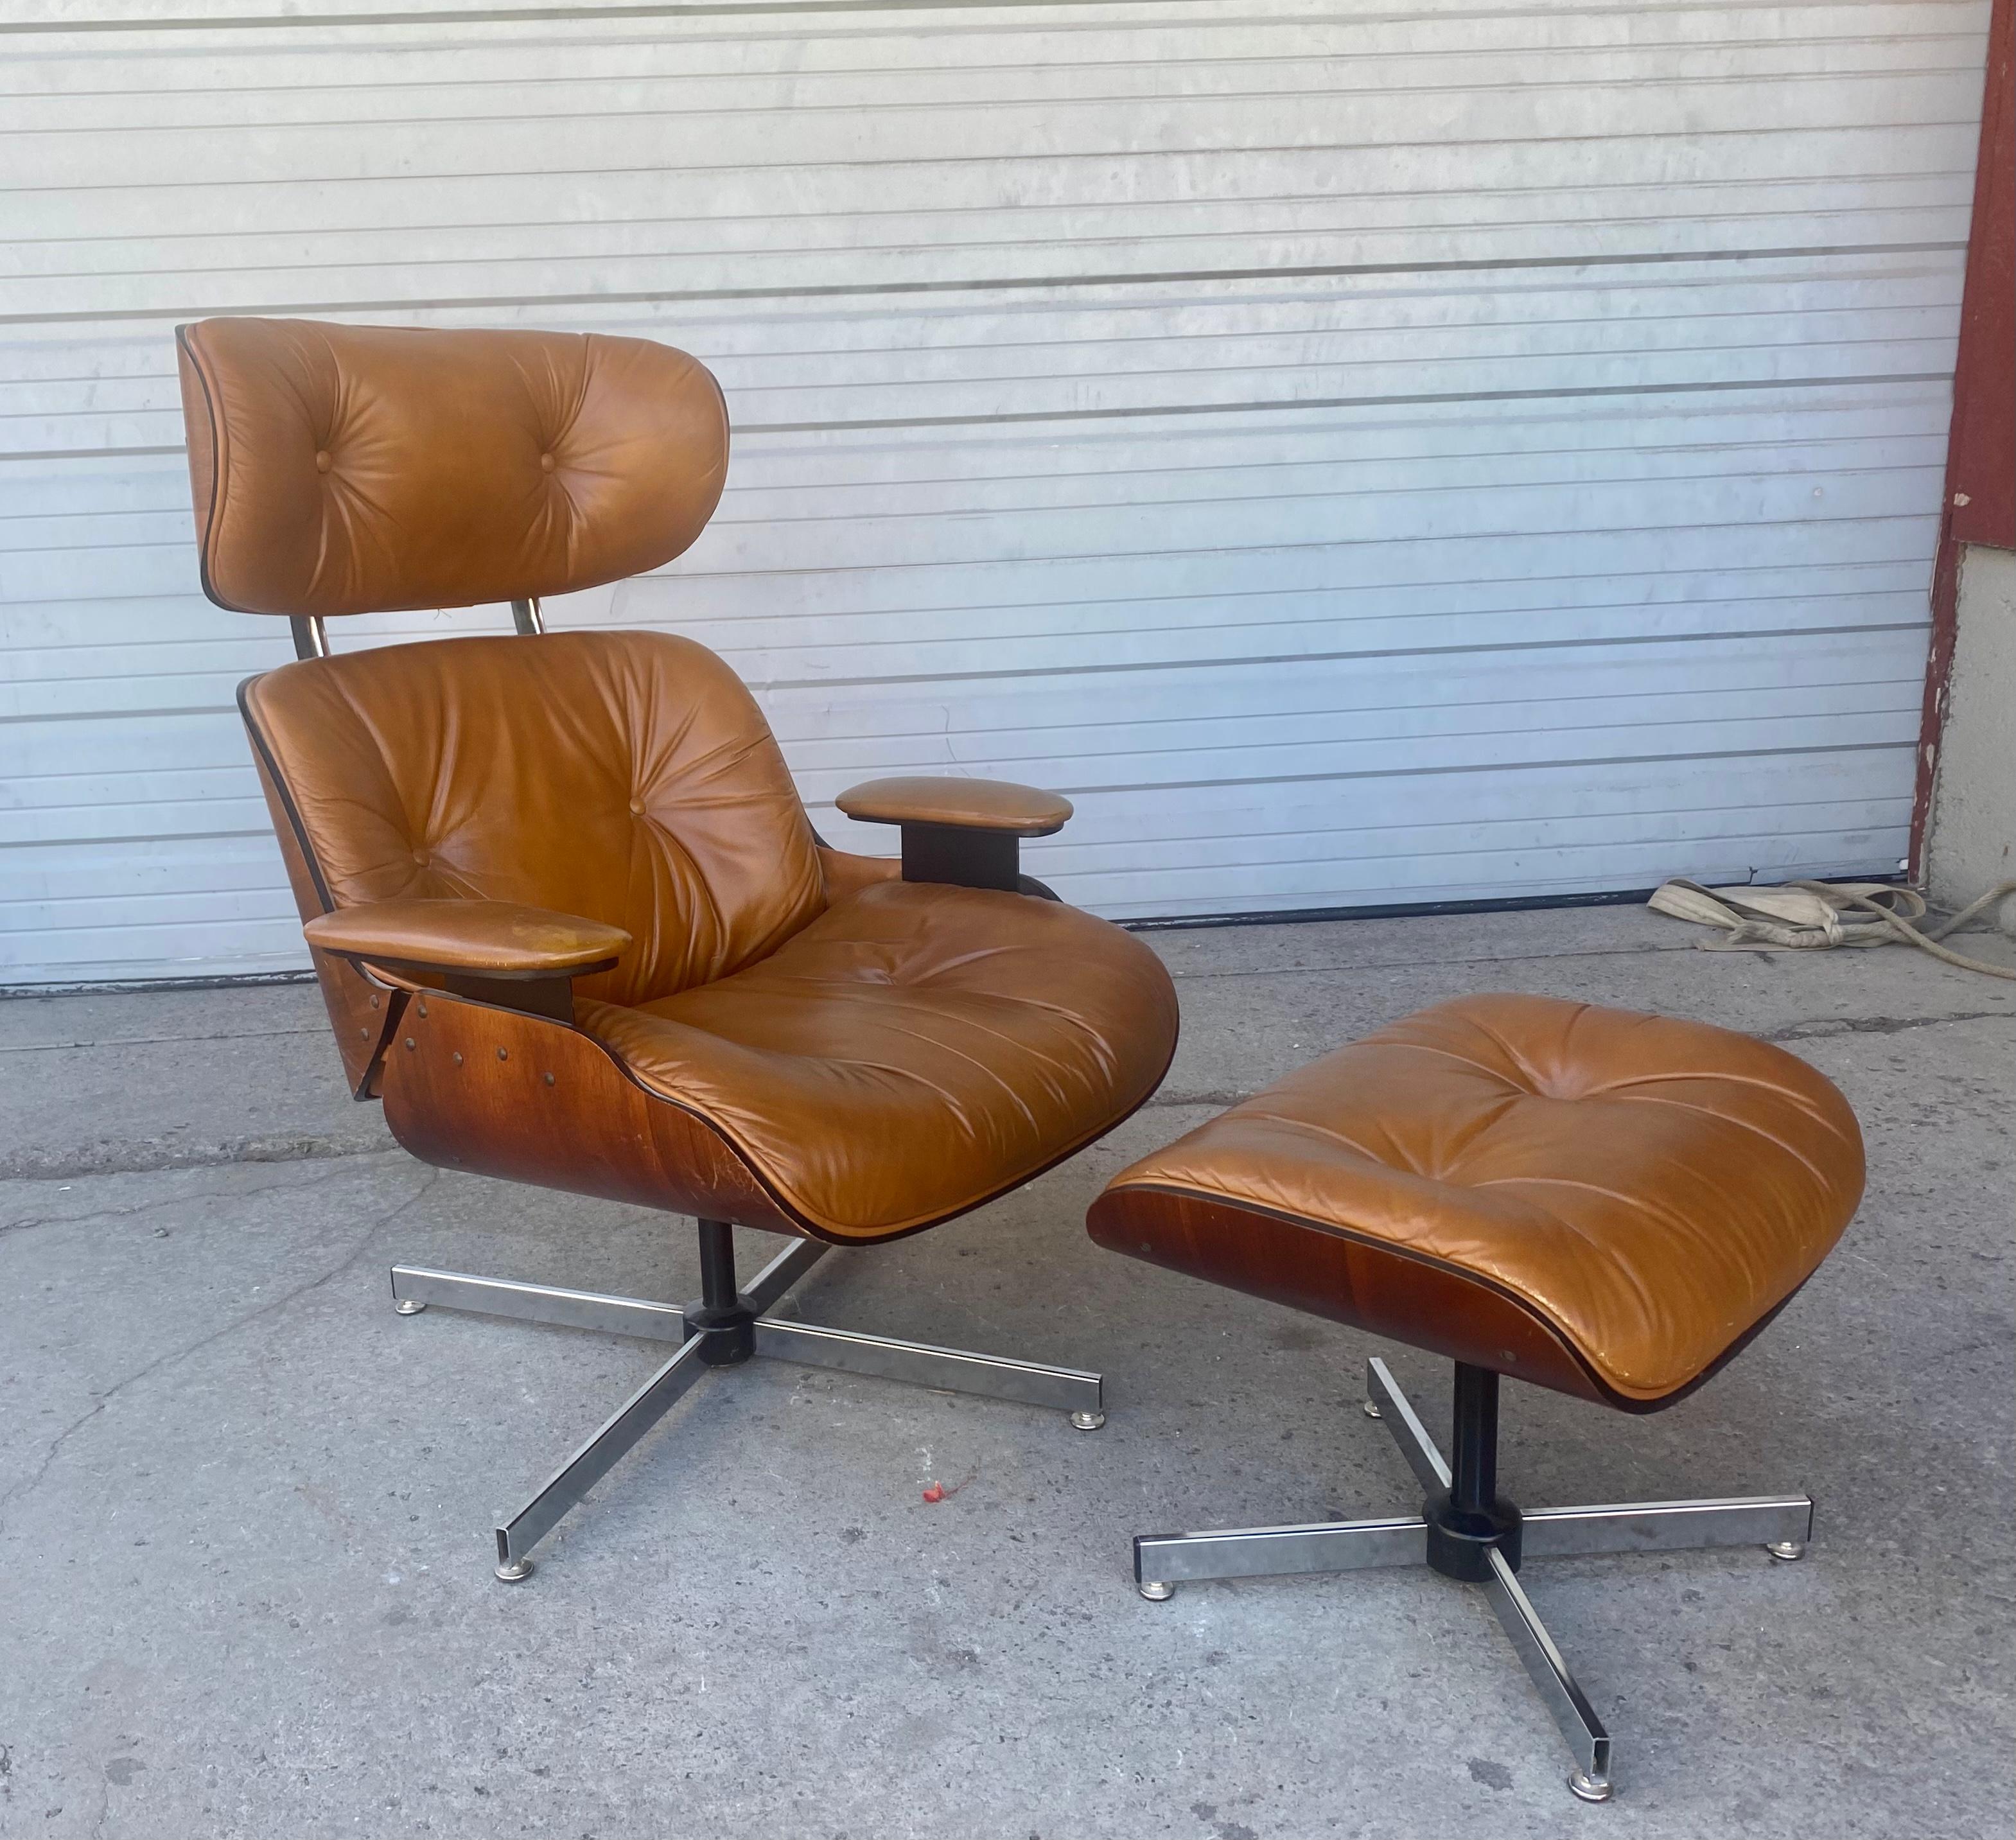 Vintage Plycraft lounge chair and ottoman, Amazing original condition, Extremely comfortable, S. Hand delivery avail to new York City or anywhere en route from Buffalo NY

Mid-Century Modern swivel lounge chair and matching ottoman by Plycraft.